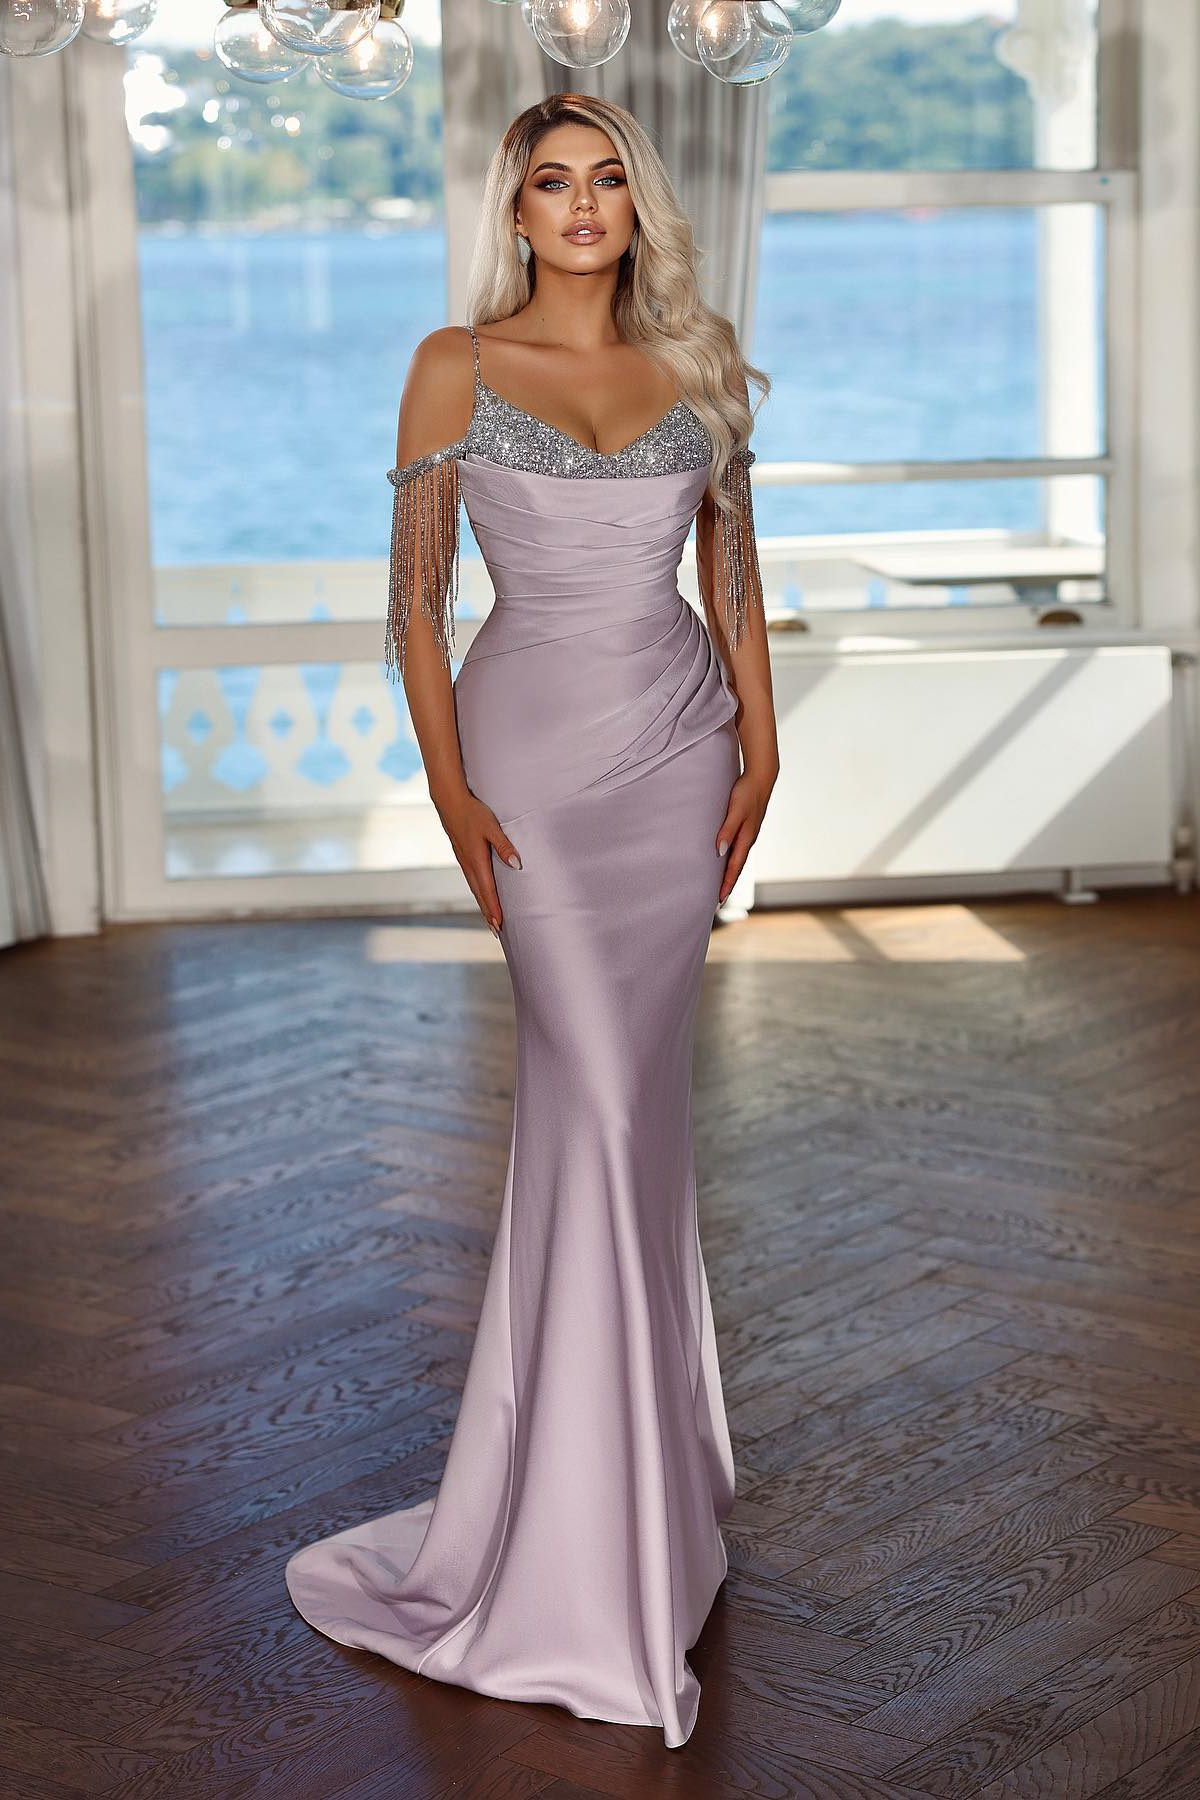 Bellasprom Spaghetti-Straps Mermaid Prom Dress Long With Sequins Tassels Bellasprom